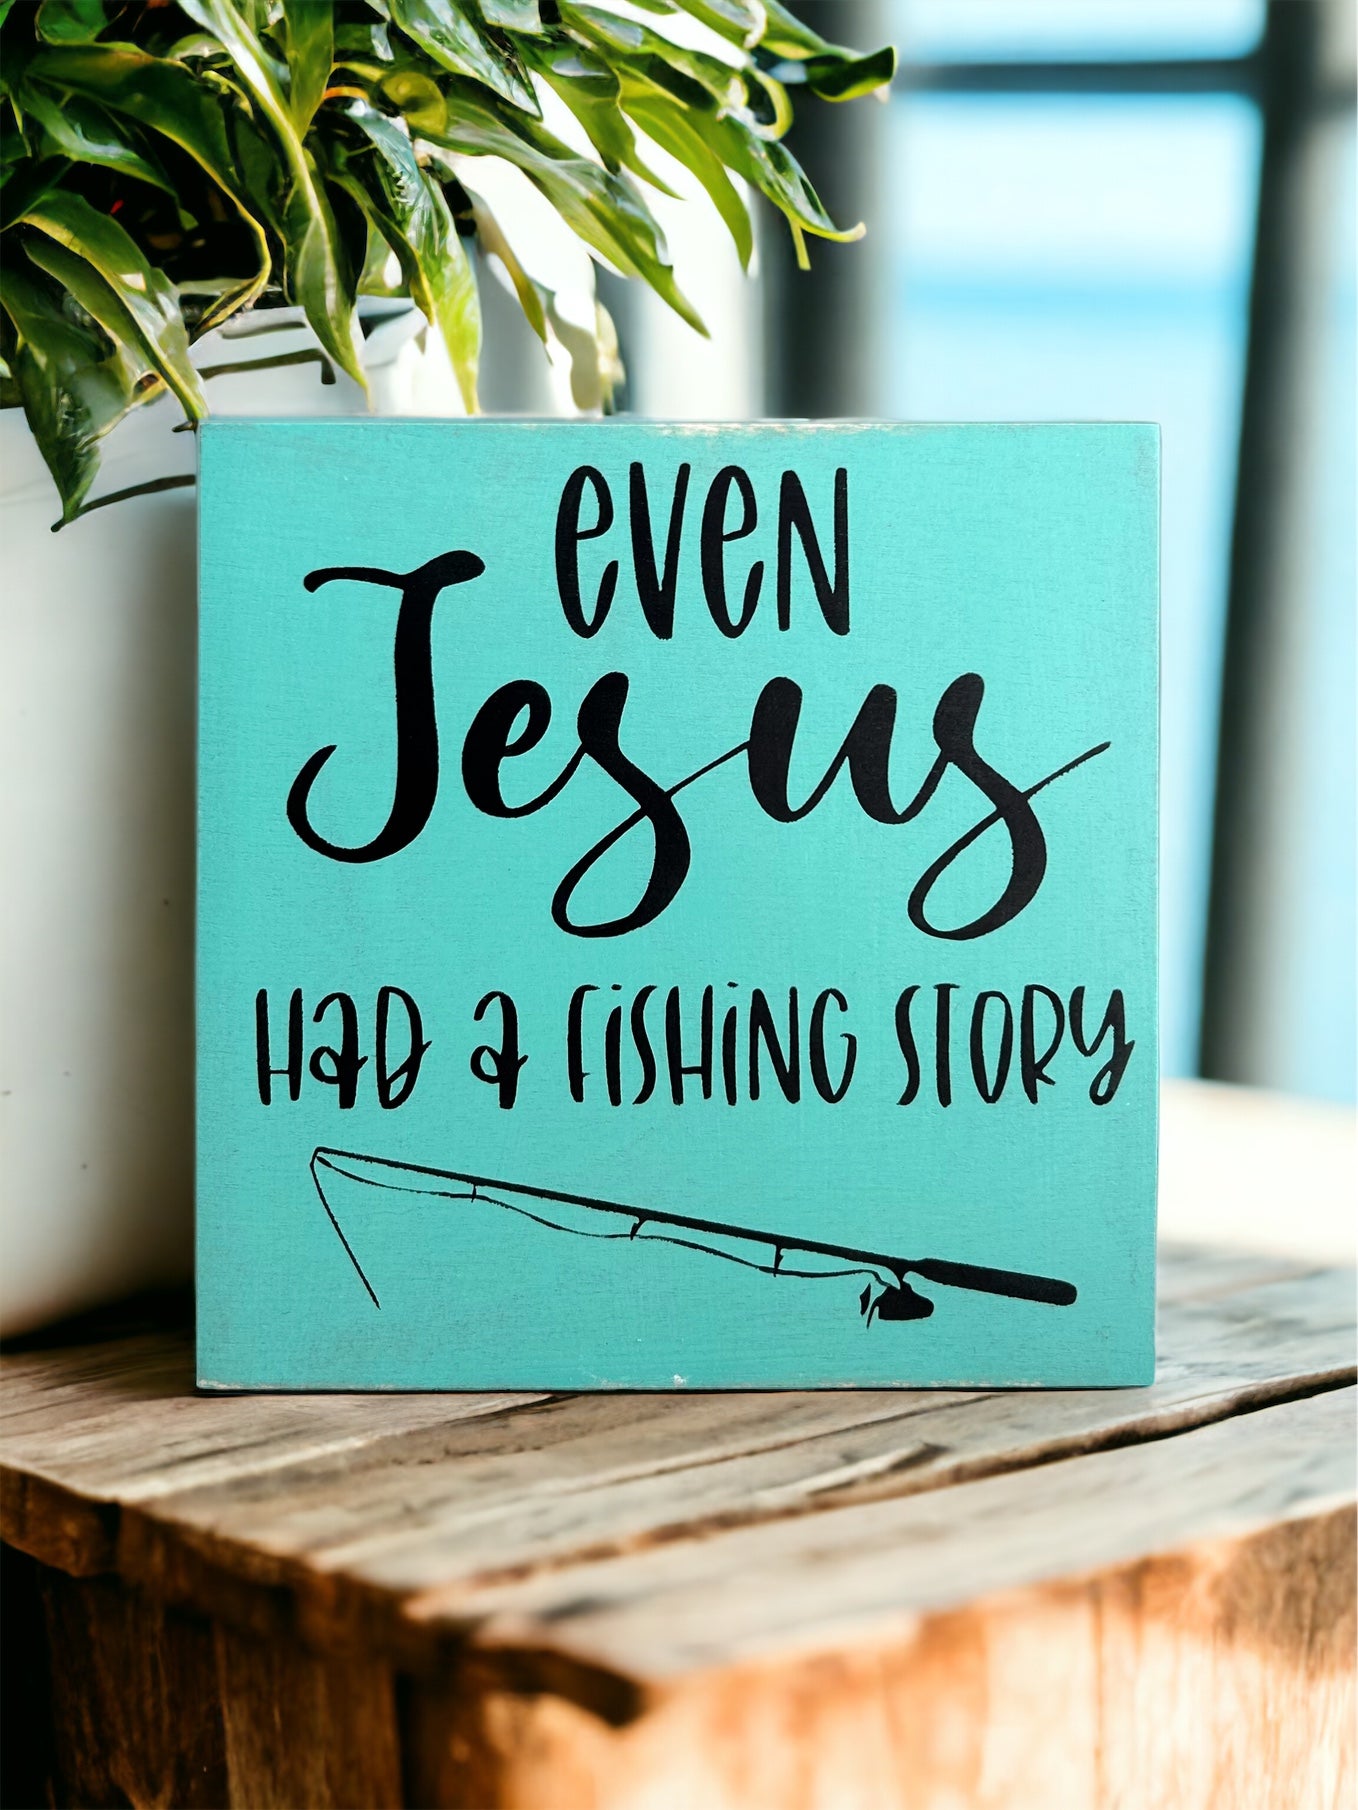 "Jesus had a fishing story" wood sign